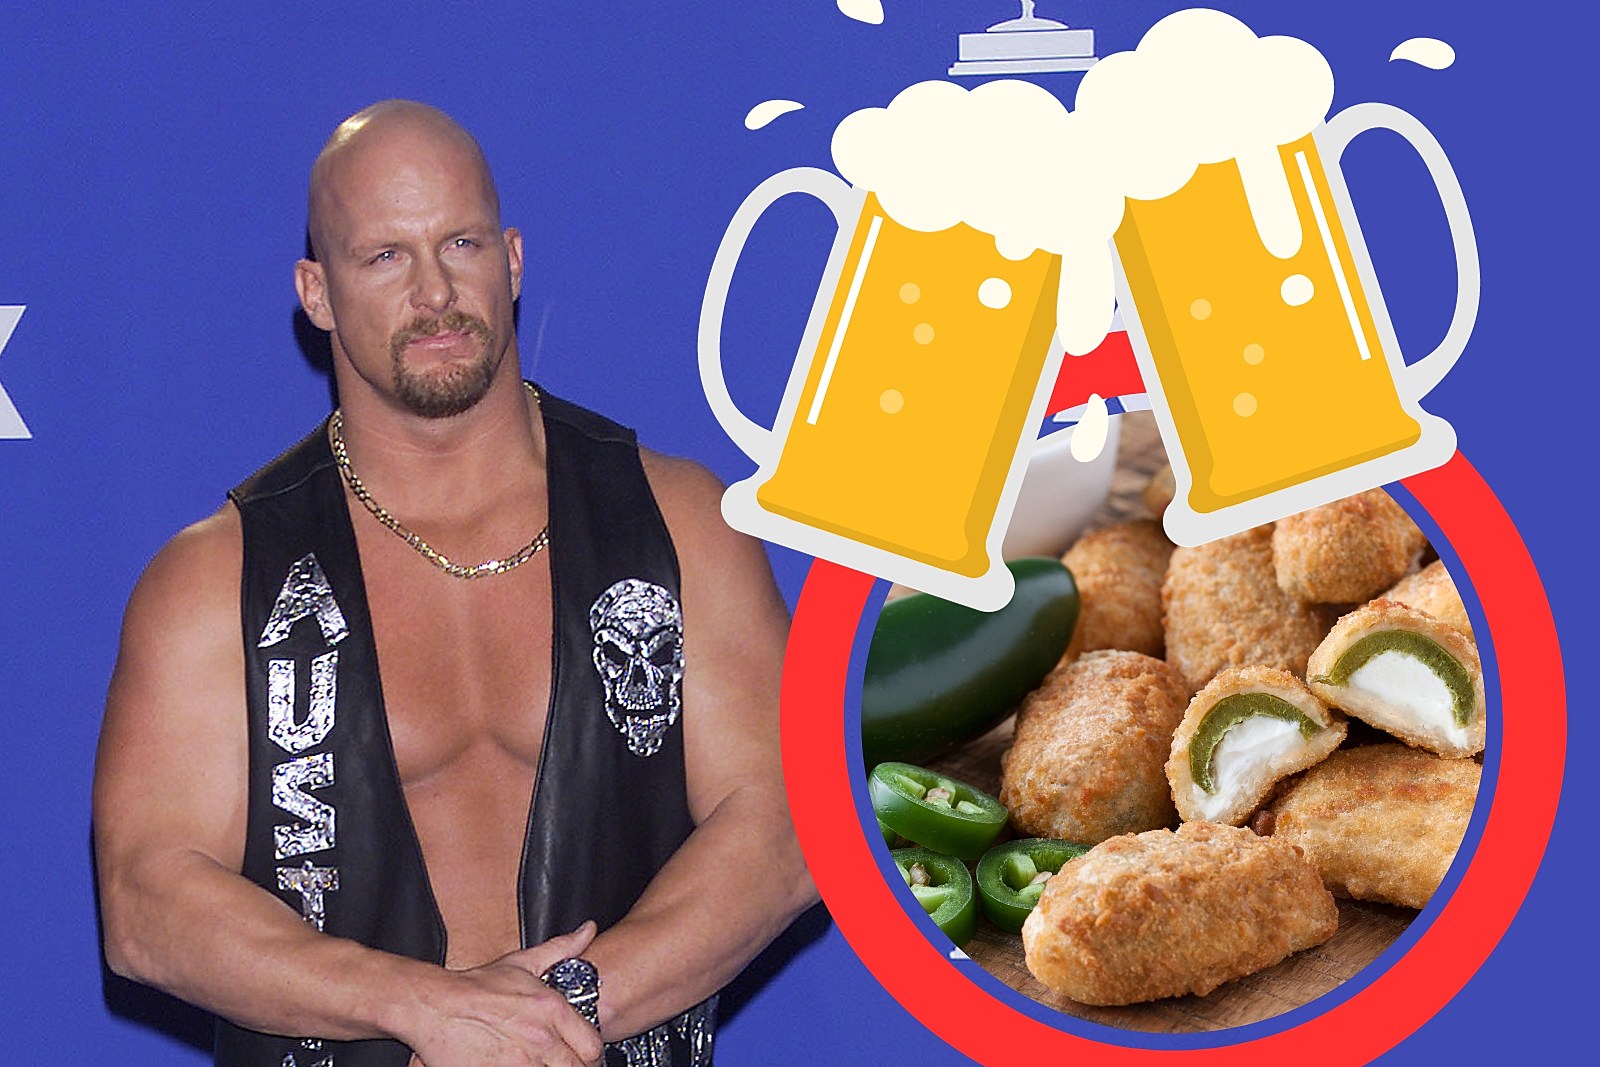 Woman Chugs Two Beers And Goes Stone Cold Steve Austin